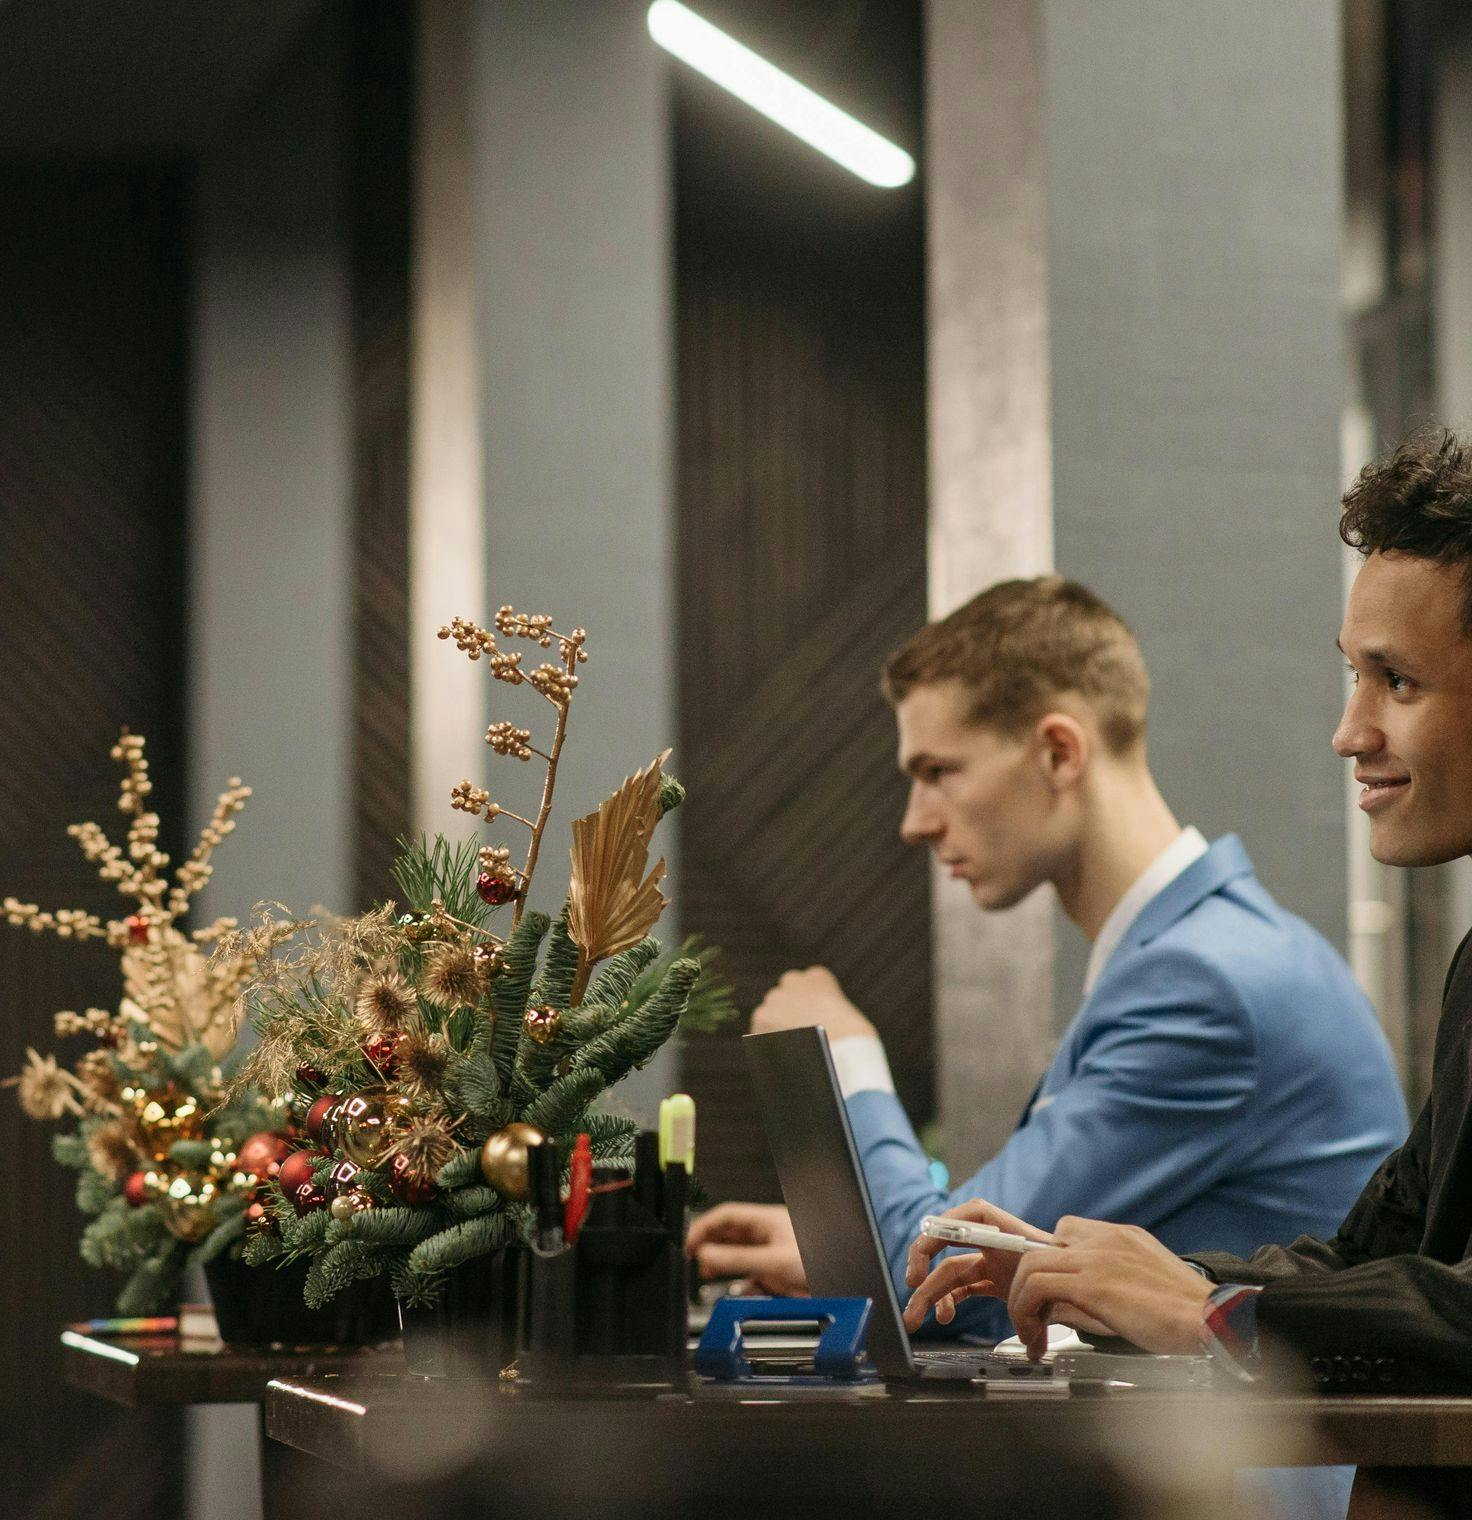 Two men working at a desk with a holiday floral arrangement